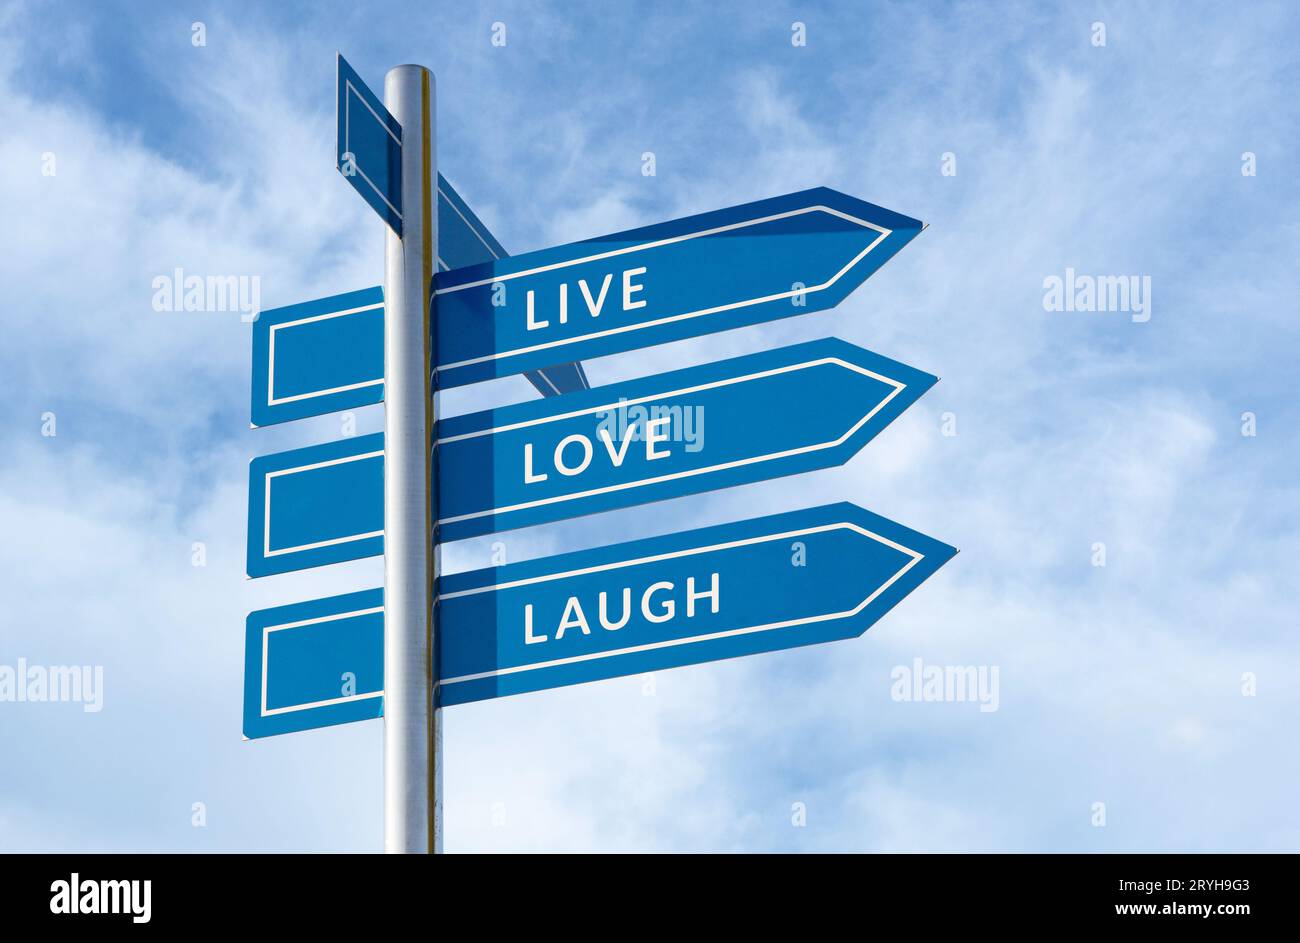 Live Love Laugh message on signpost isolated on blue sky background Stock Photo